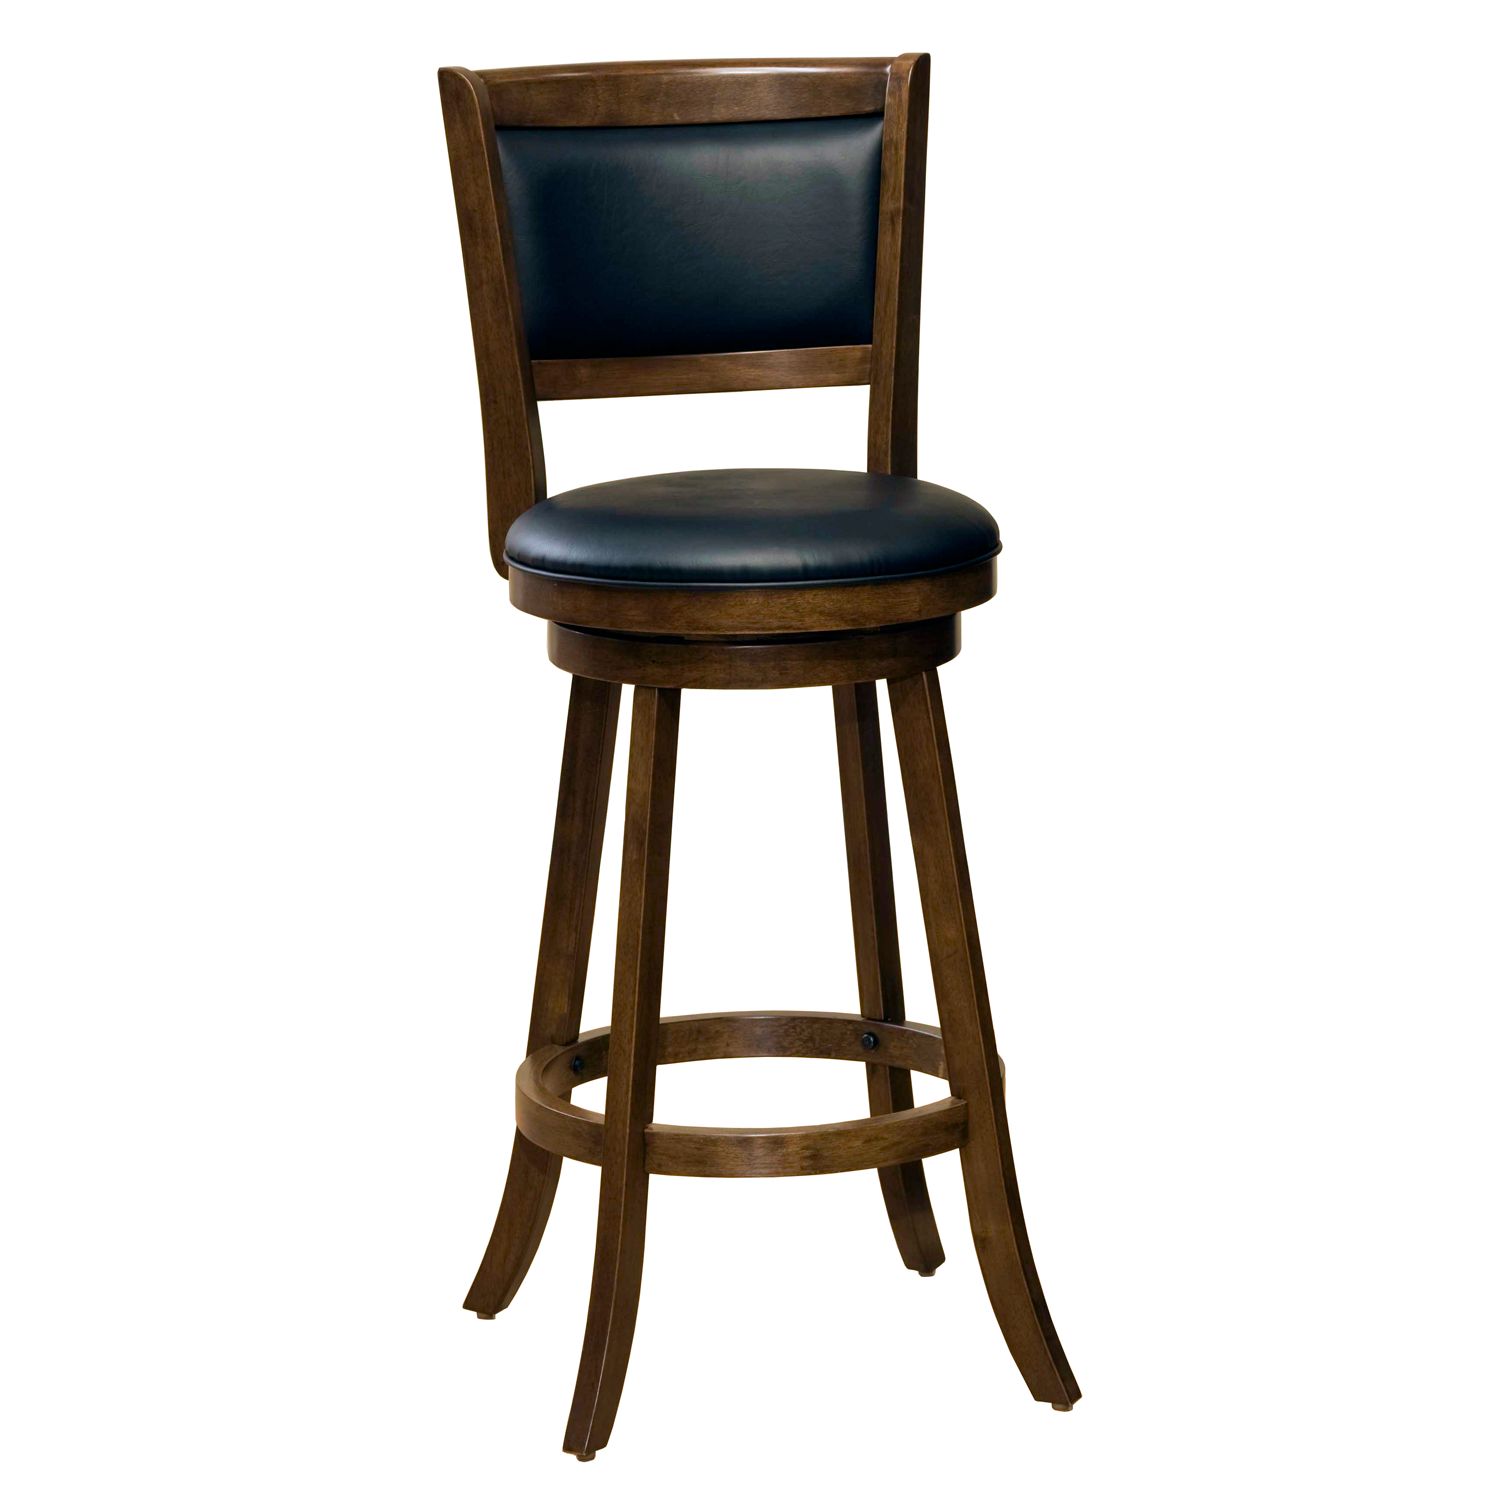 Image for Hillsdale Furniture Dennery Swivel Bar Stool at Kohl's.